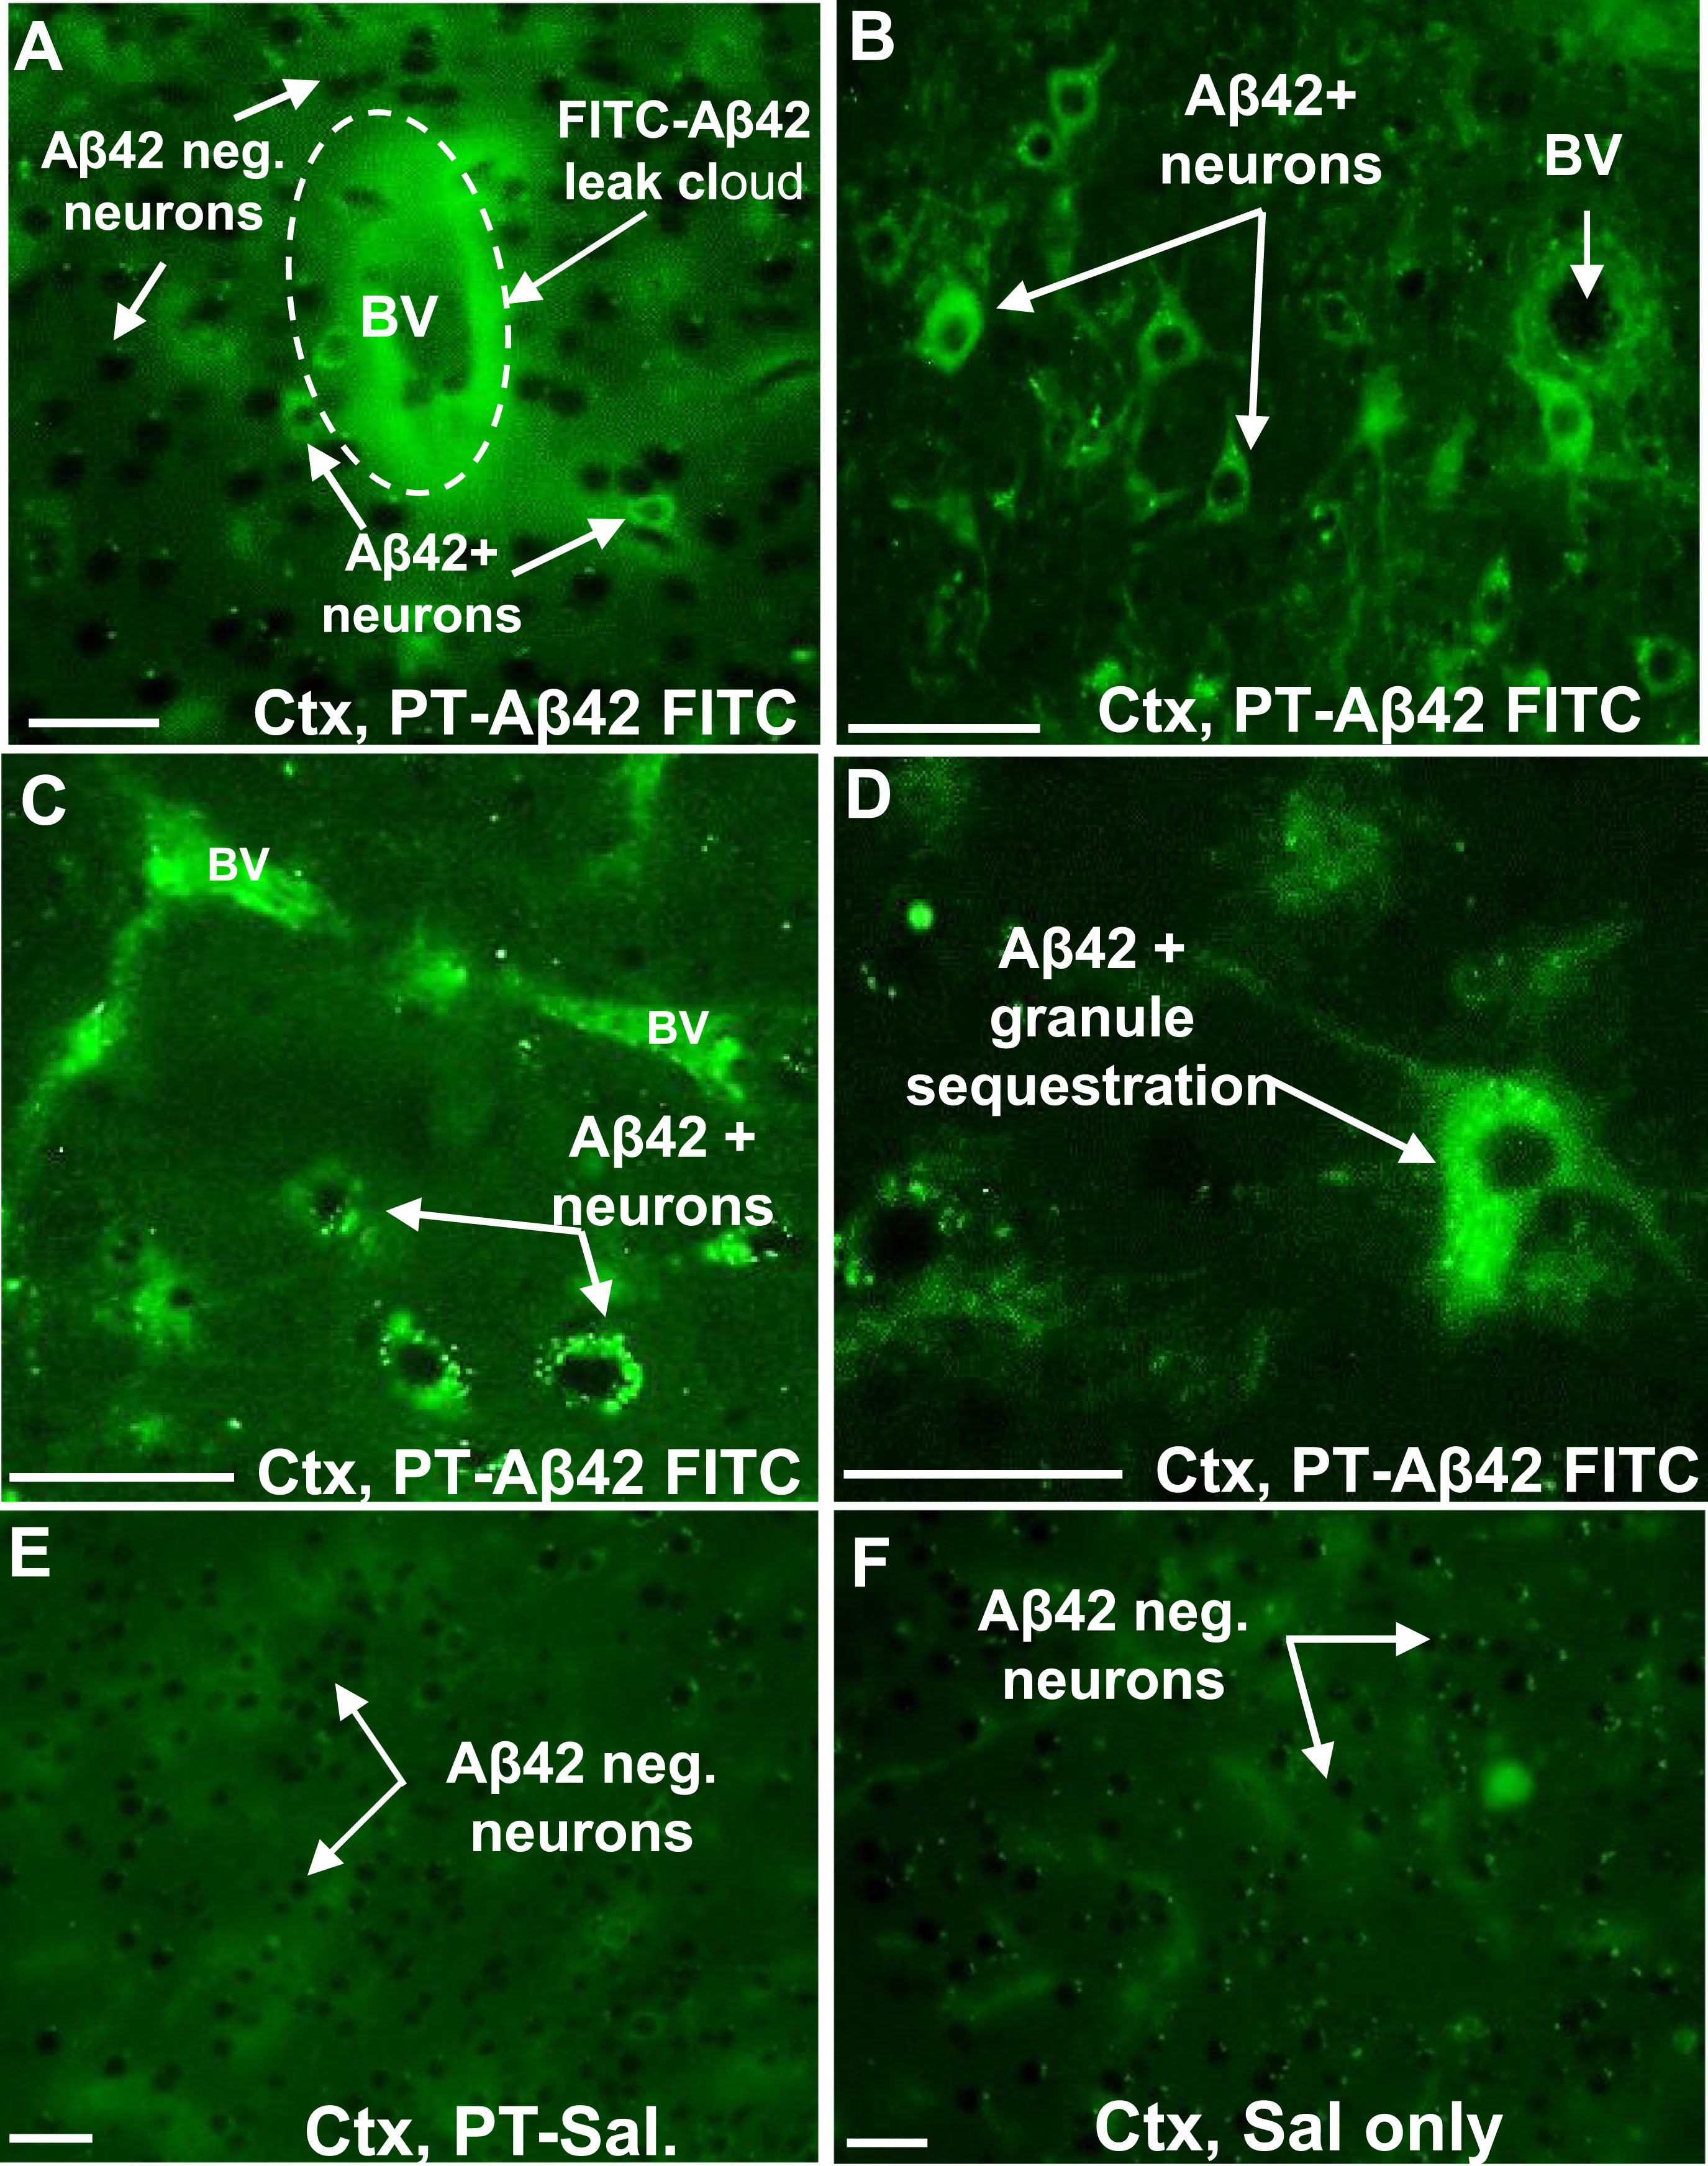 FITC-labeled A
β42 enters the brain parenchyma, shows selective affinity for pyramidal neurons, and is internalized within these cells. A–D) In the cerebral cortex of mice injected with PT and FITC-Aβ42, FITC-Aβ42 leaks out from blood vessels (white dashed circle in A) and is selectively internalized in pyramidal neurons (B–D). In neurons, FITC-Aβ42 was localized within numerous discrete granules in the neuronal perikaryon, suggesting that cell surface-bound FITC-Aβ42 is internalized and accumulates within a membrane-enclosed compartment. E, F) Background fluorescence in the cerebral cortex of mice not exposed to FITC-Aβ42 [i.e., PT-Sal (E) and Sal-only (F)] mice. No punctate immunofluorescence like FITC-Aβ42 was seen in PT-Sal (E) and Sal-only (F) mice. PN, Pyramidal neurons: BV, blood vessel; Cap, capillary; PT, Pertussis toxin; Ctx, cerebral cortex. Scale bar = 50μm.